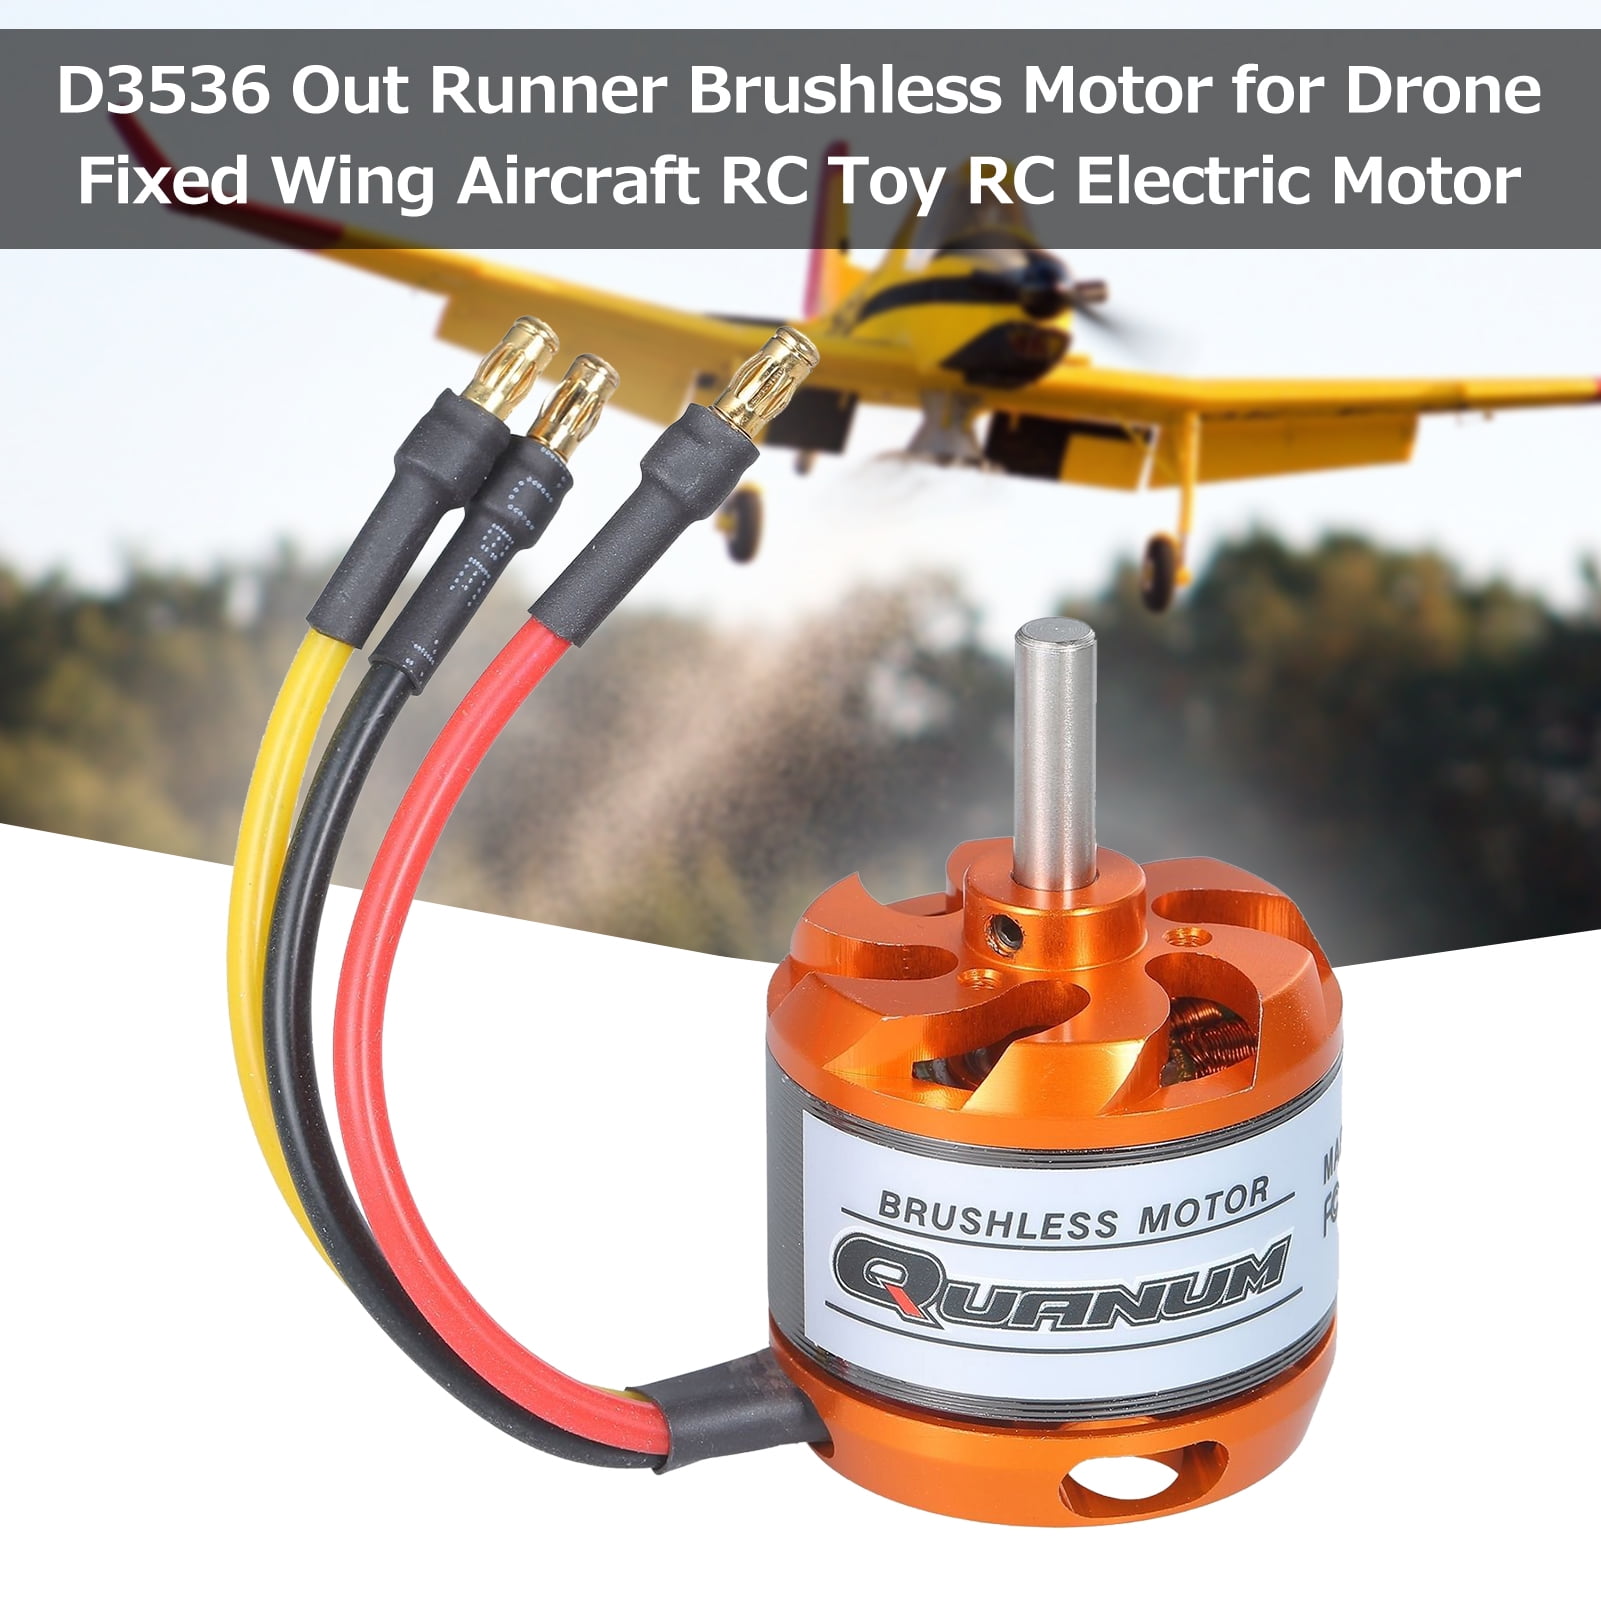 DYS Brushless Motor 910KV D3536 for Remote Control Fixed Wing Aircraft Airplane 